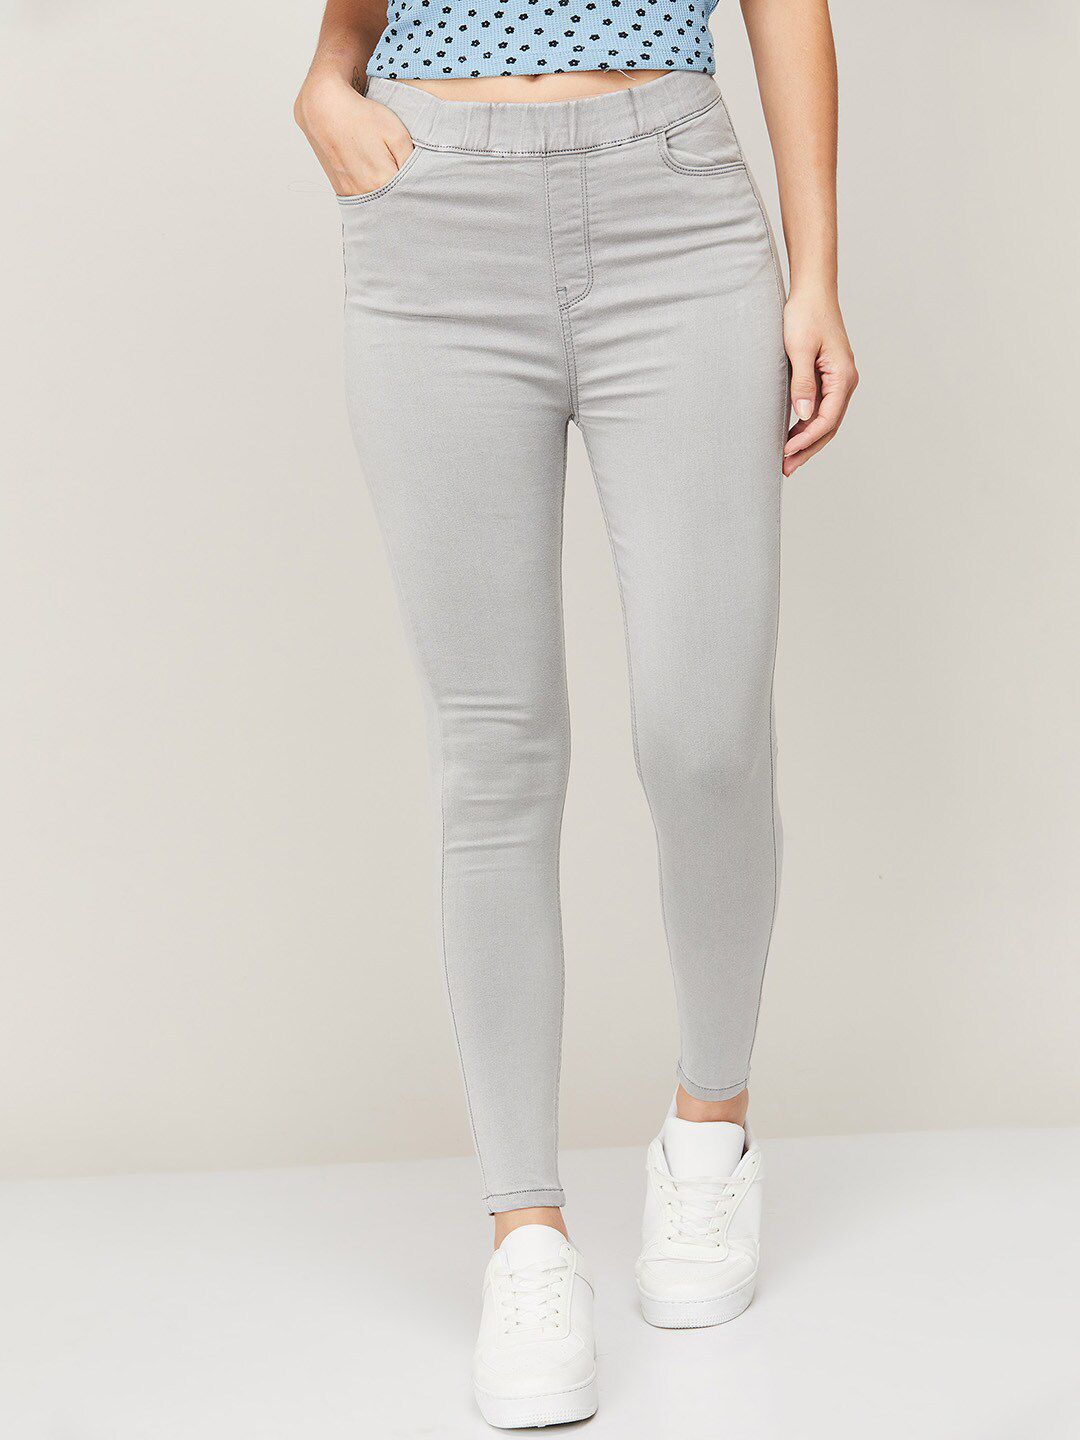 Ginger by Lifestyle Women Grey Skinny Fit Jeans Price in India